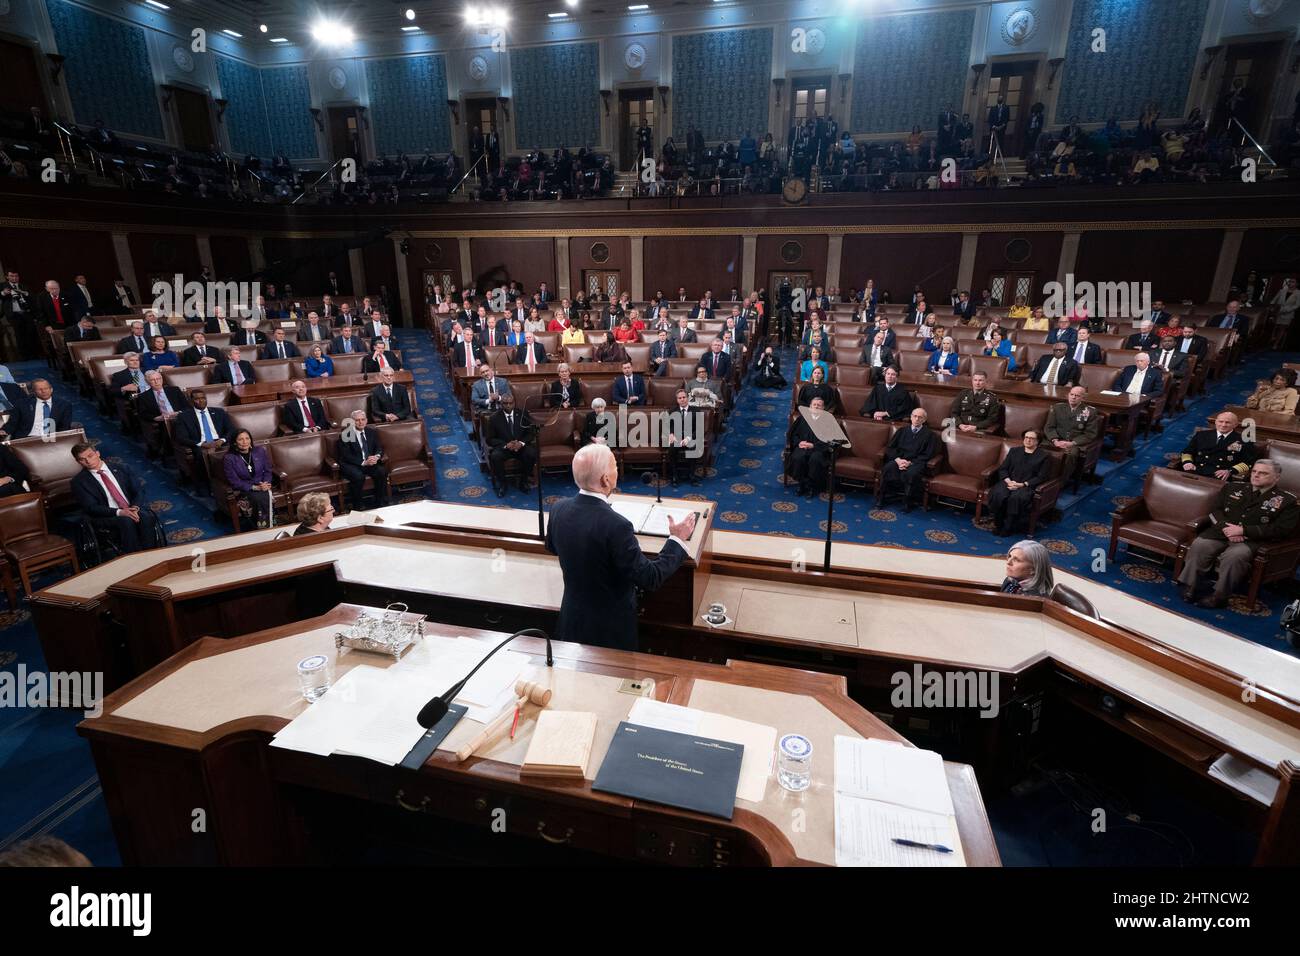 Washington, USA. 01st Mar, 2022. US President Joe Biden delivers his State of the Union address before a joint session of Congress in the United States House of Representatives chamber on Capitol Hill in Washington, DC, USA 01 March 2022. President Biden's speech comes amid Russia's ongoing invasion and bombardment of Ukraine. (Photo by Pool/Sipa USA) Credit: Sipa USA/Alamy Live News Stock Photo